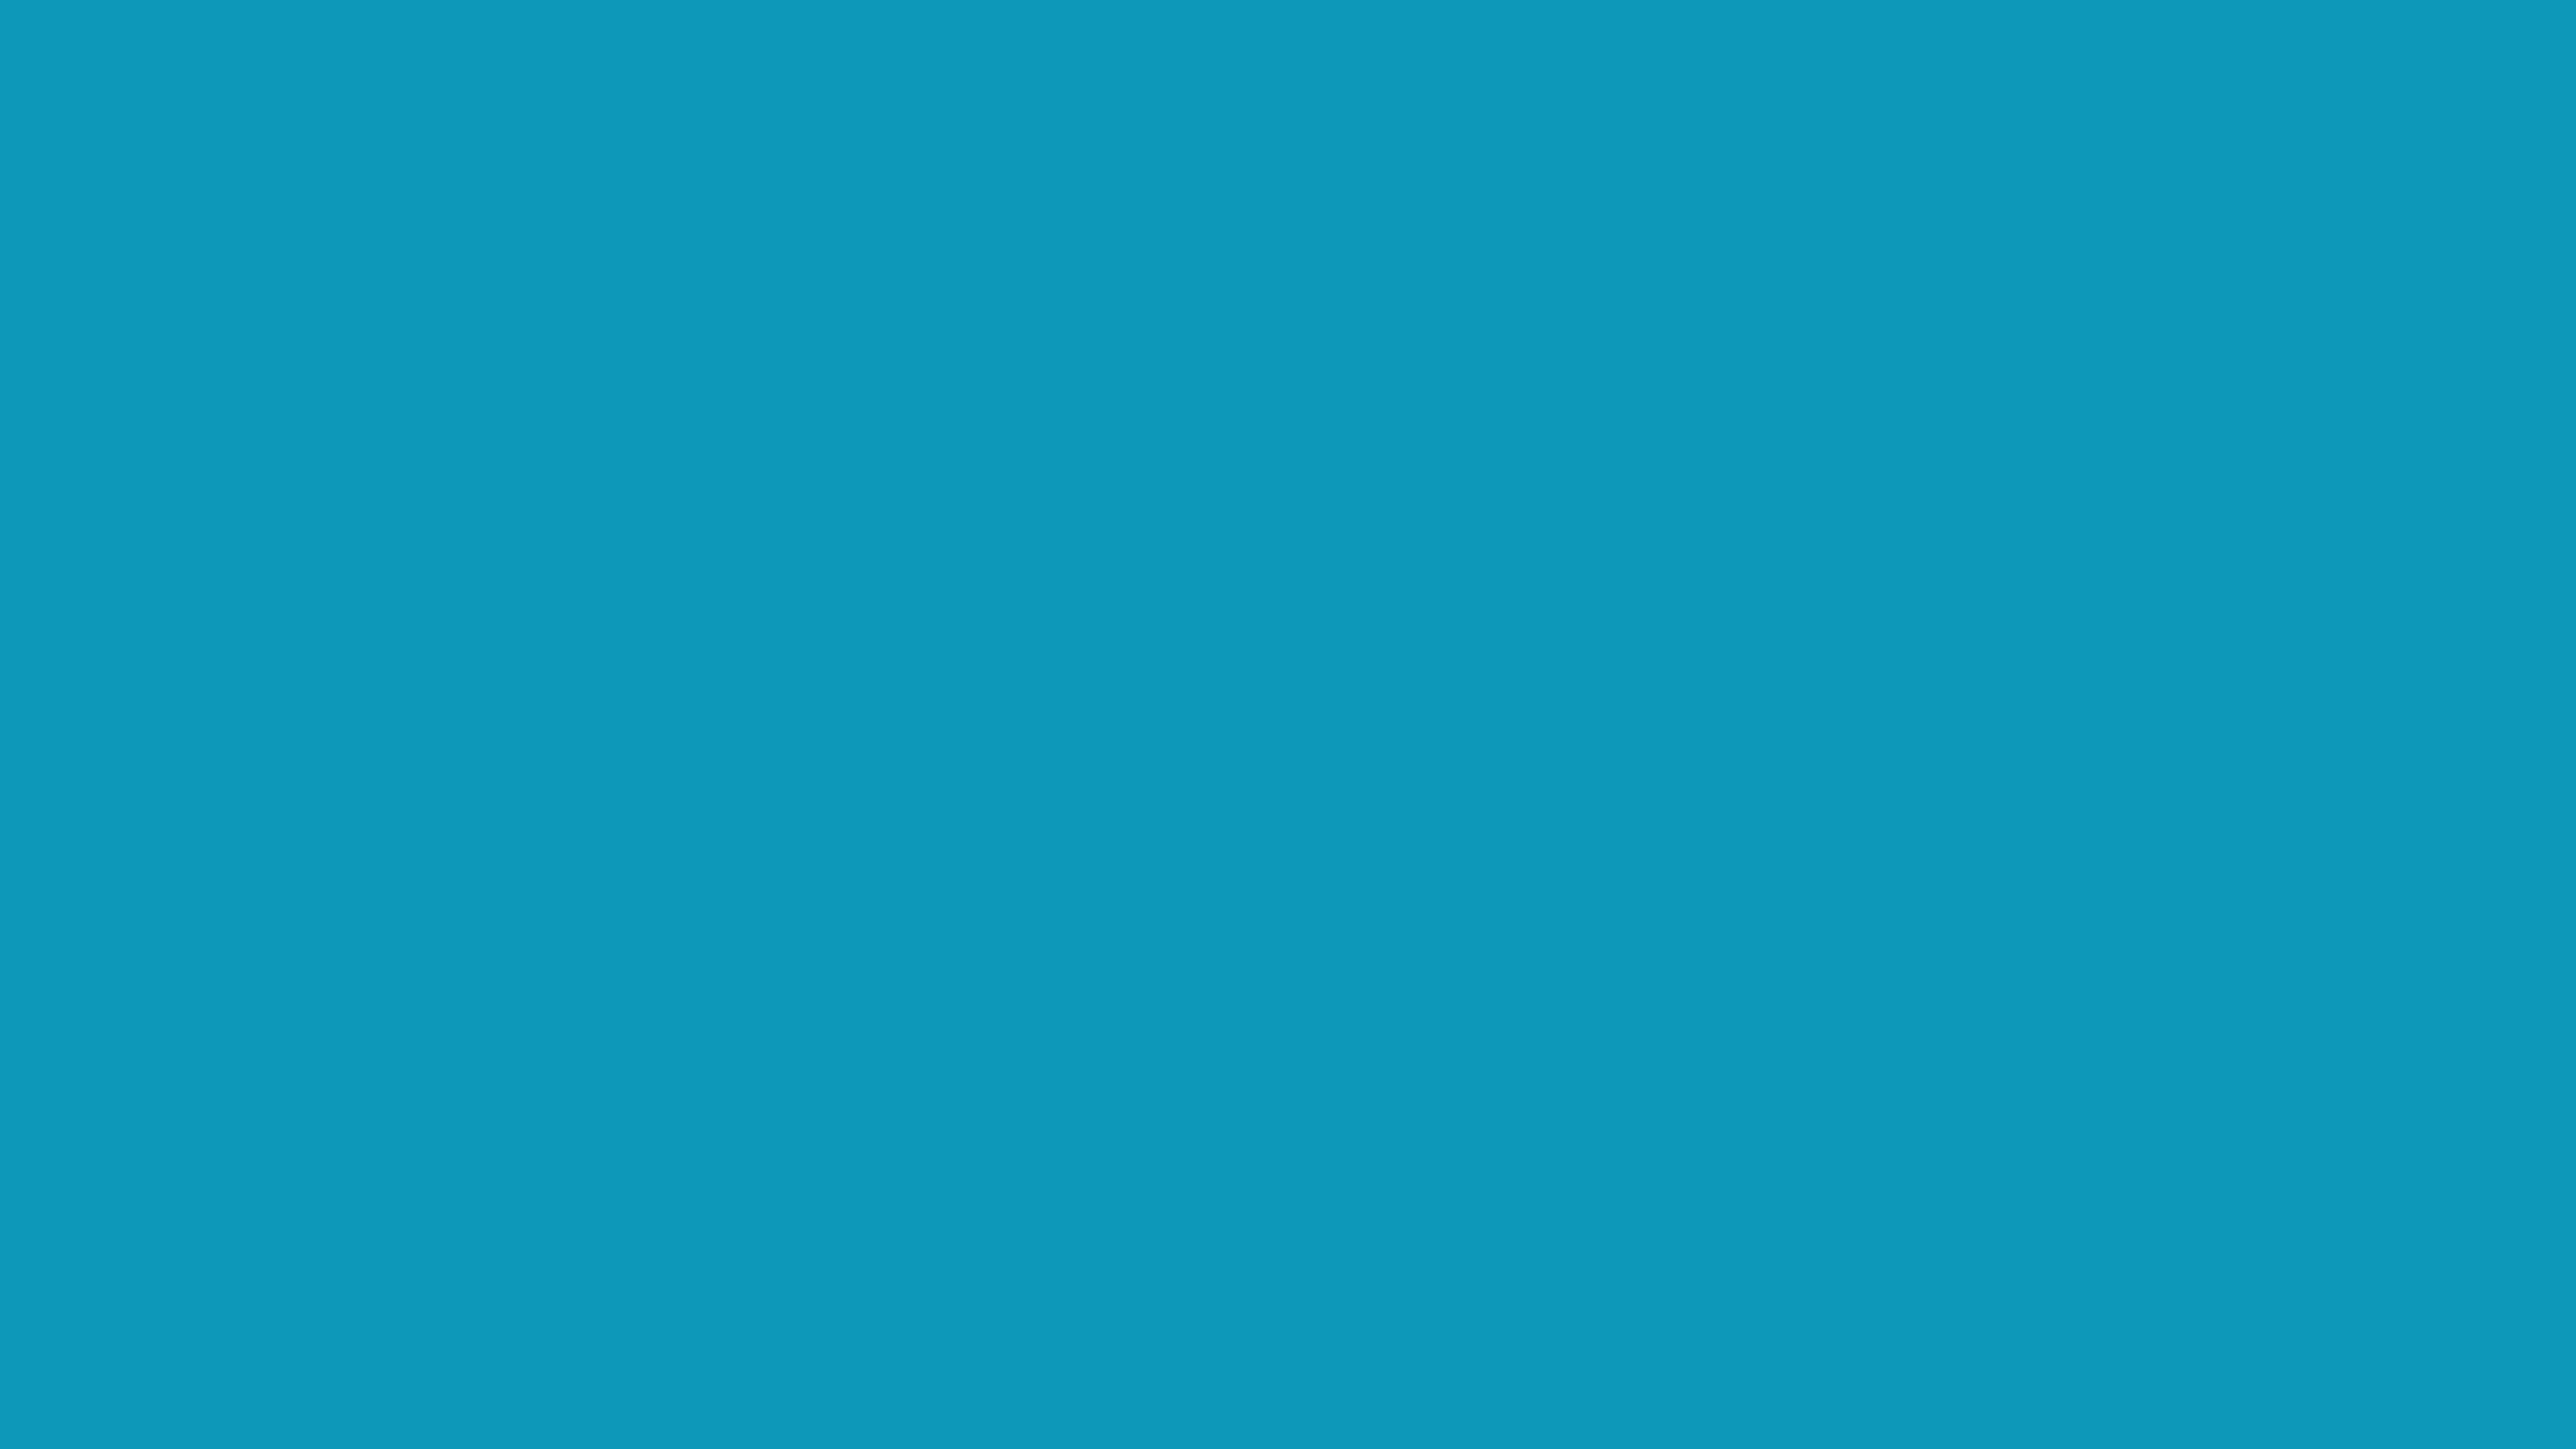 4096x2304 Blue-green Solid Color Background